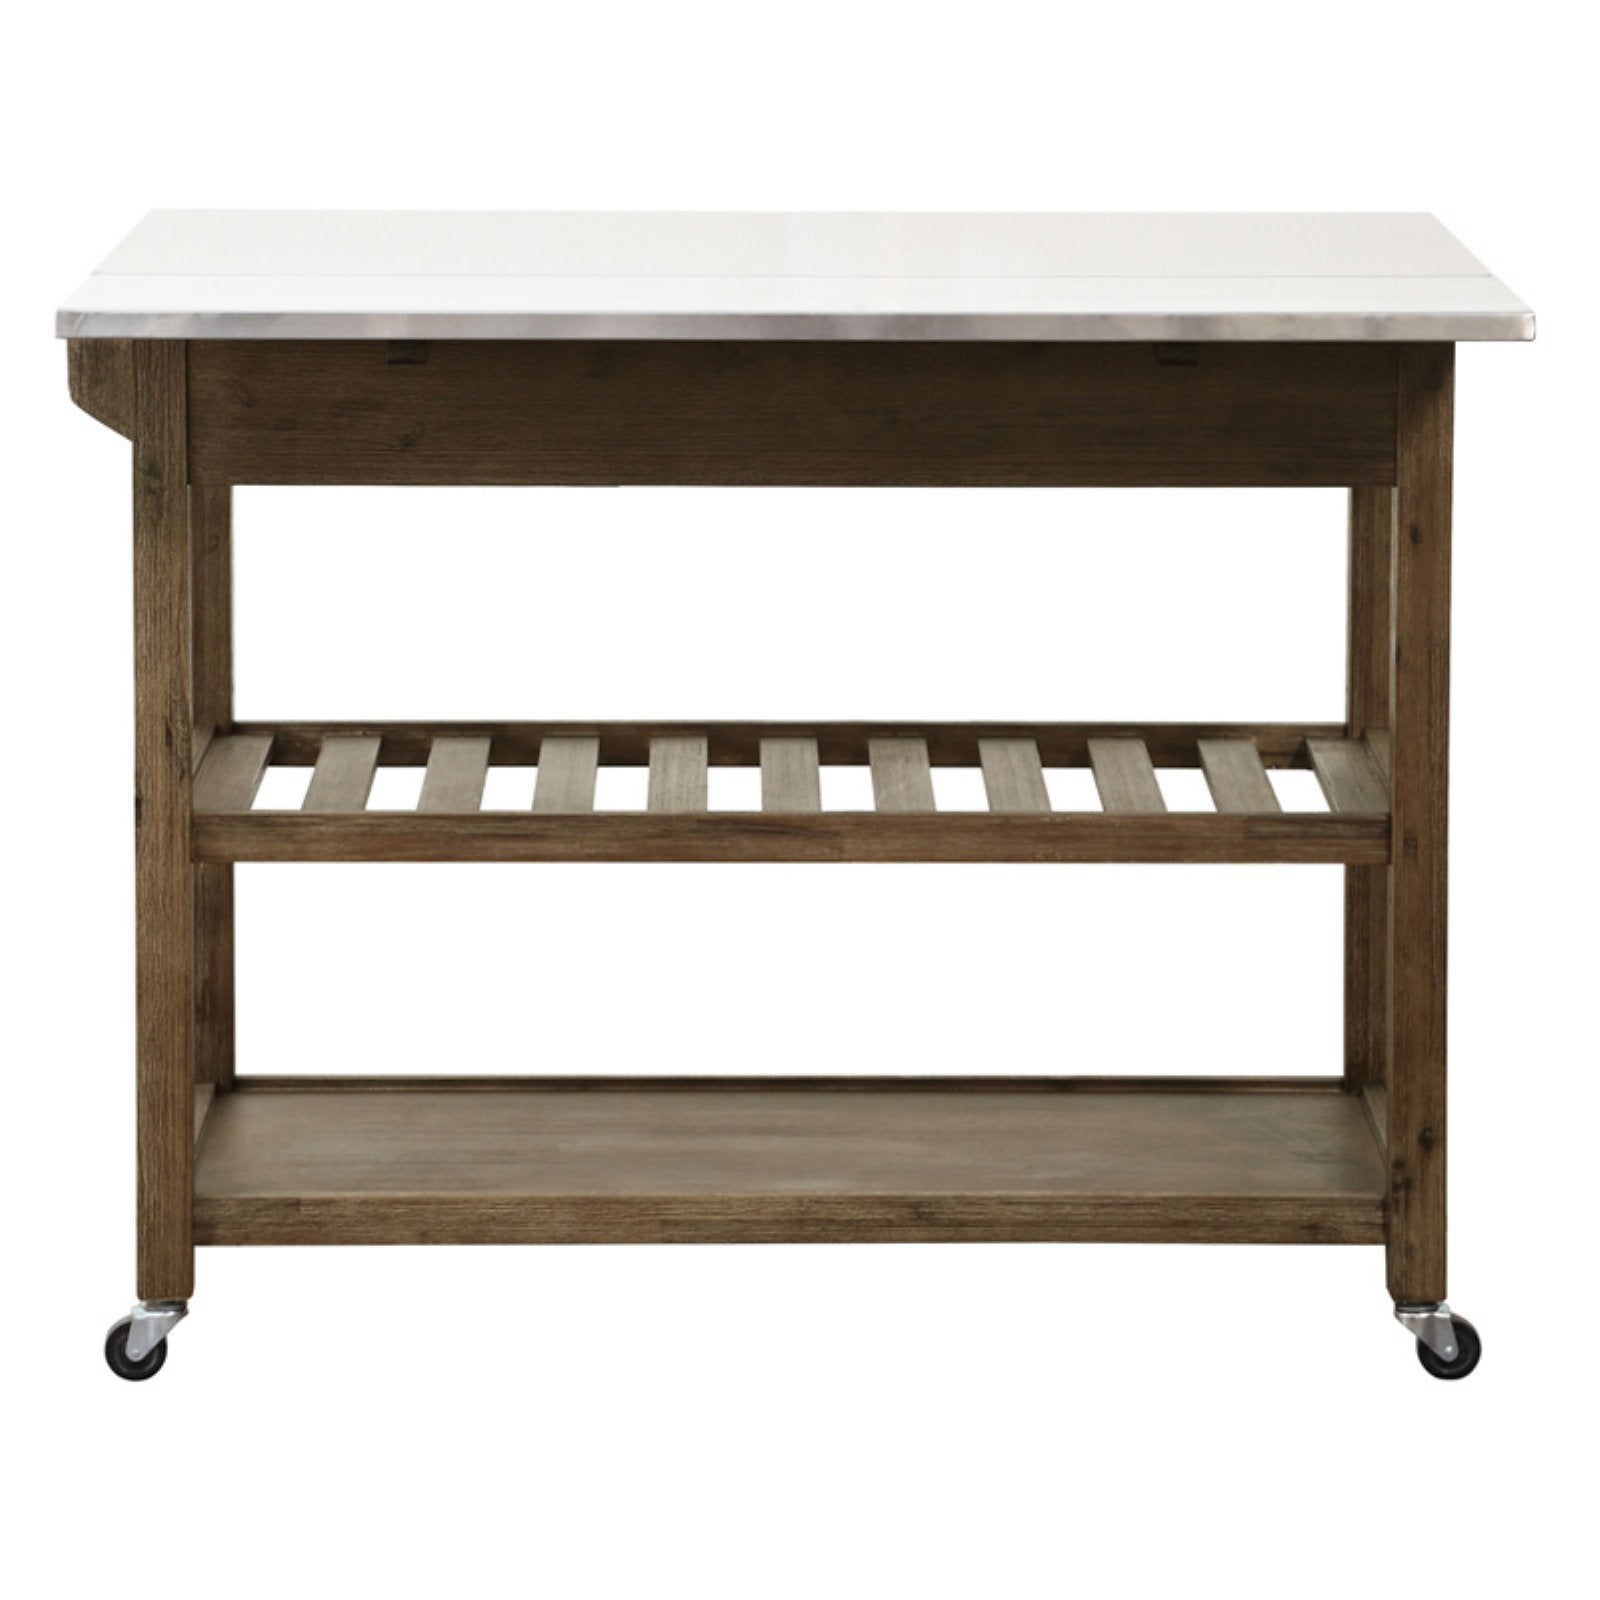 Boraam Sonoma Drop Leaf Wood Kitchen Cart with Stainless Steel Top - Barnwood Wire-Brush Finish